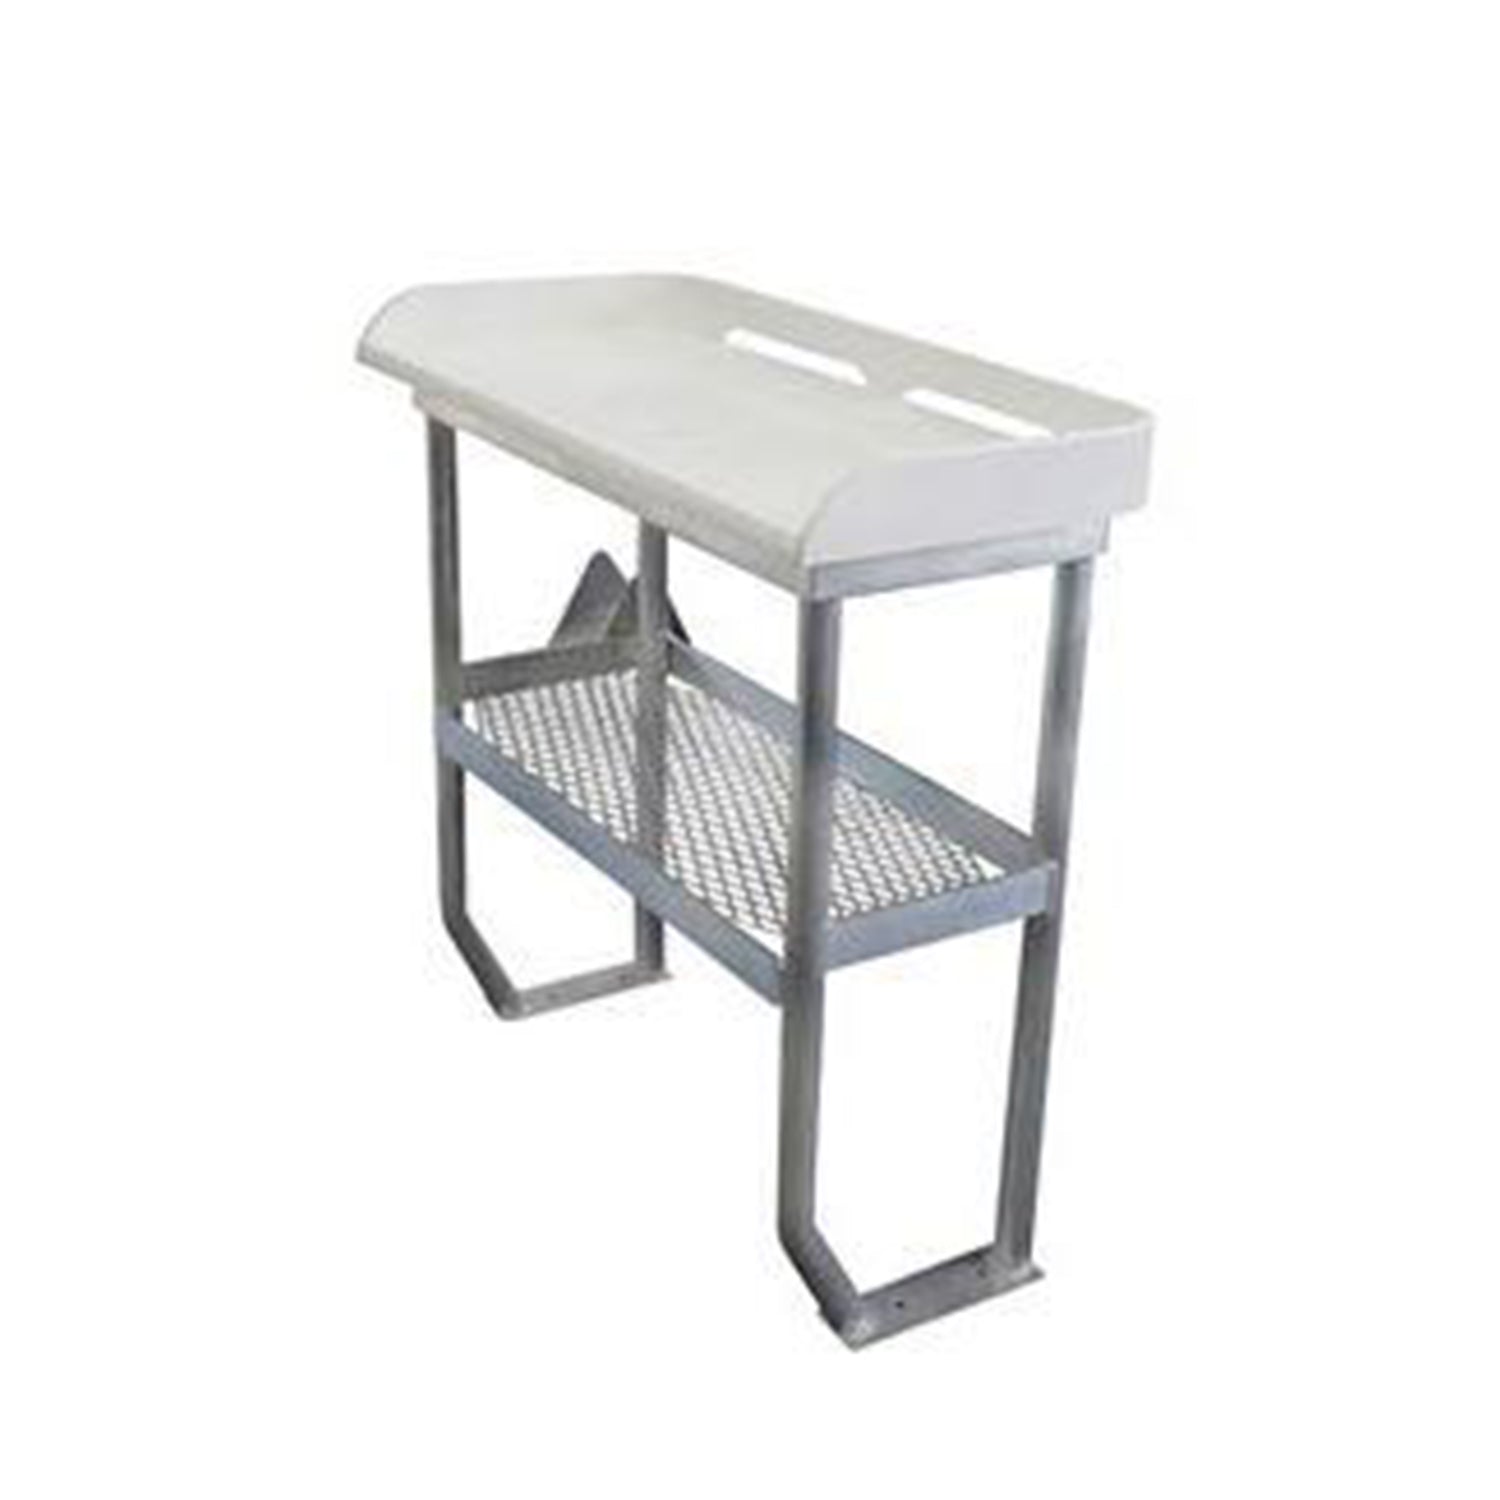 38 x 18 4 Leg Fish Cleaning Station [FISH4L1838] – Prime Dock Supplies